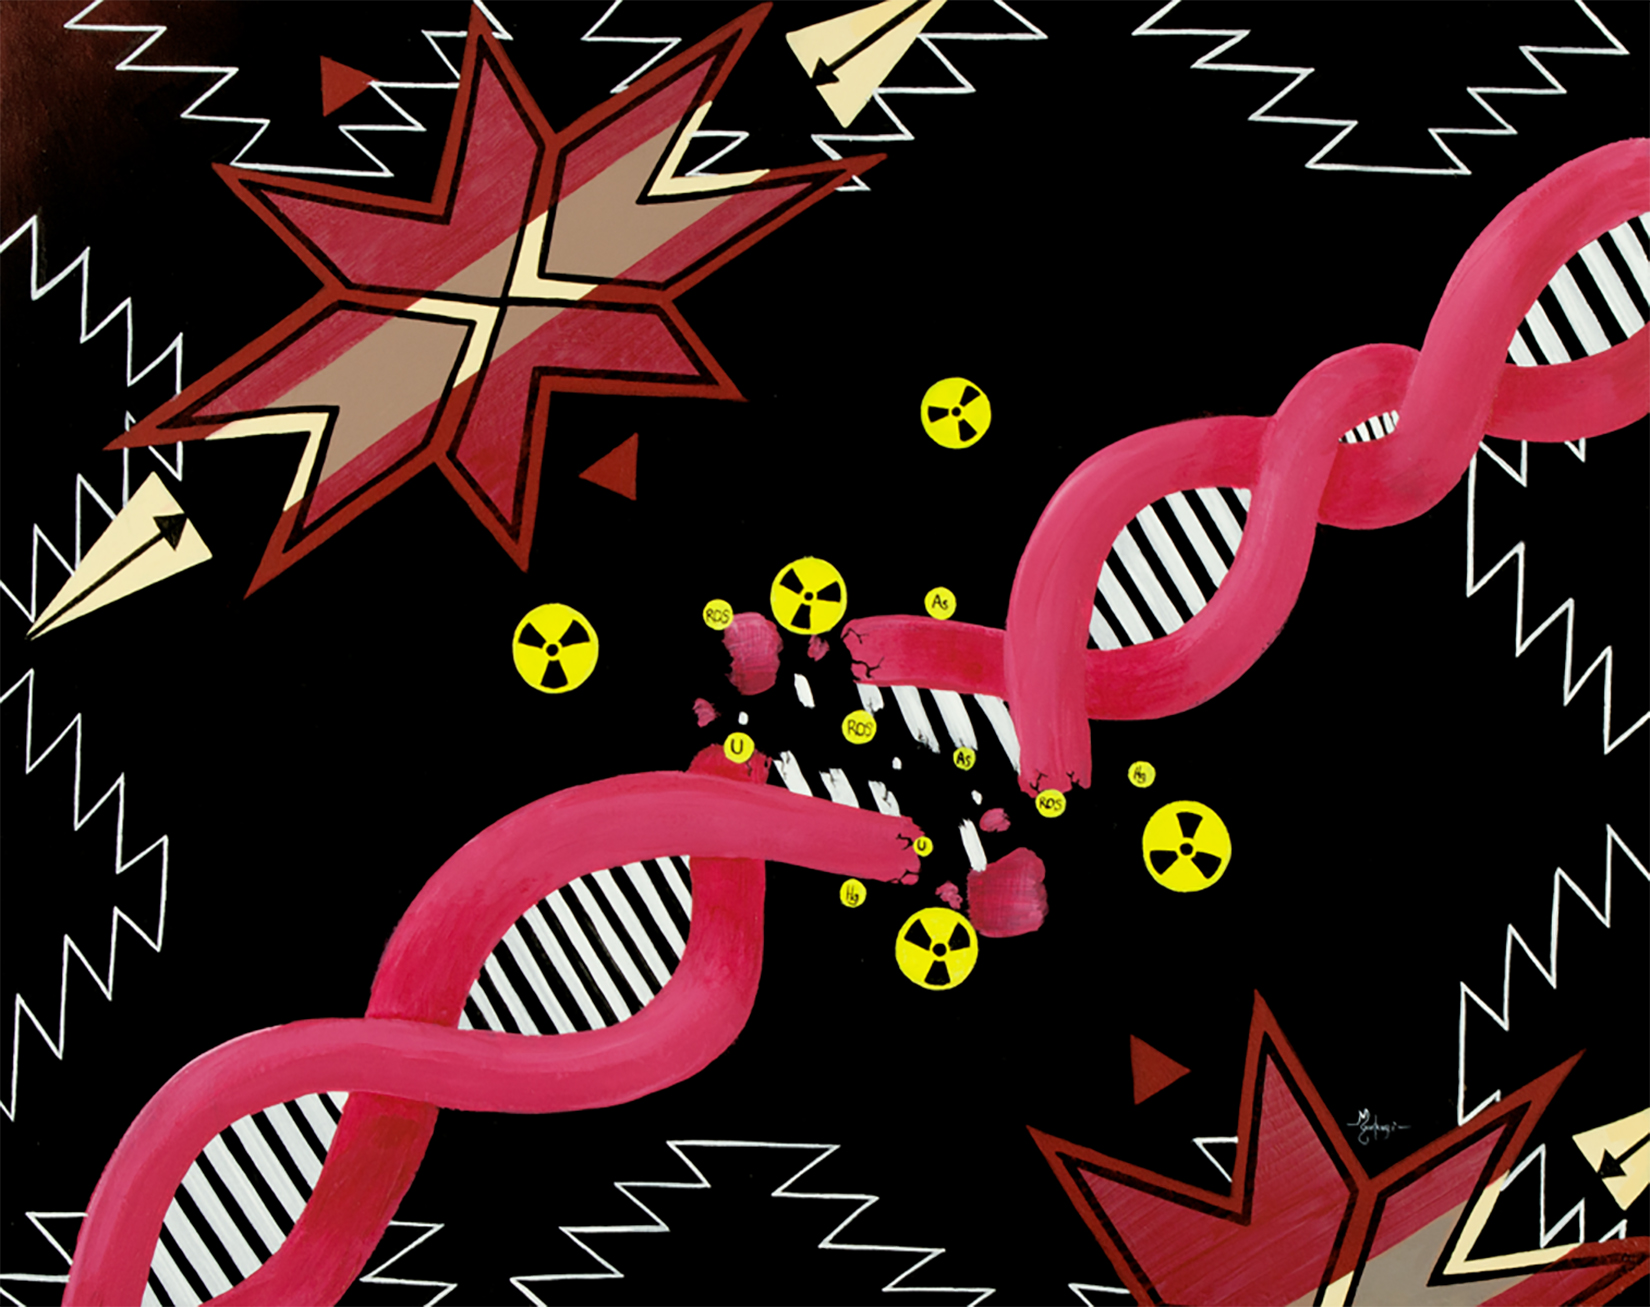 Semi-abstract painting in a black, brown, red, and white palette with Zuni motifs and a diagonal double-helix strand being broken by small yellow radioactive waste symbols.